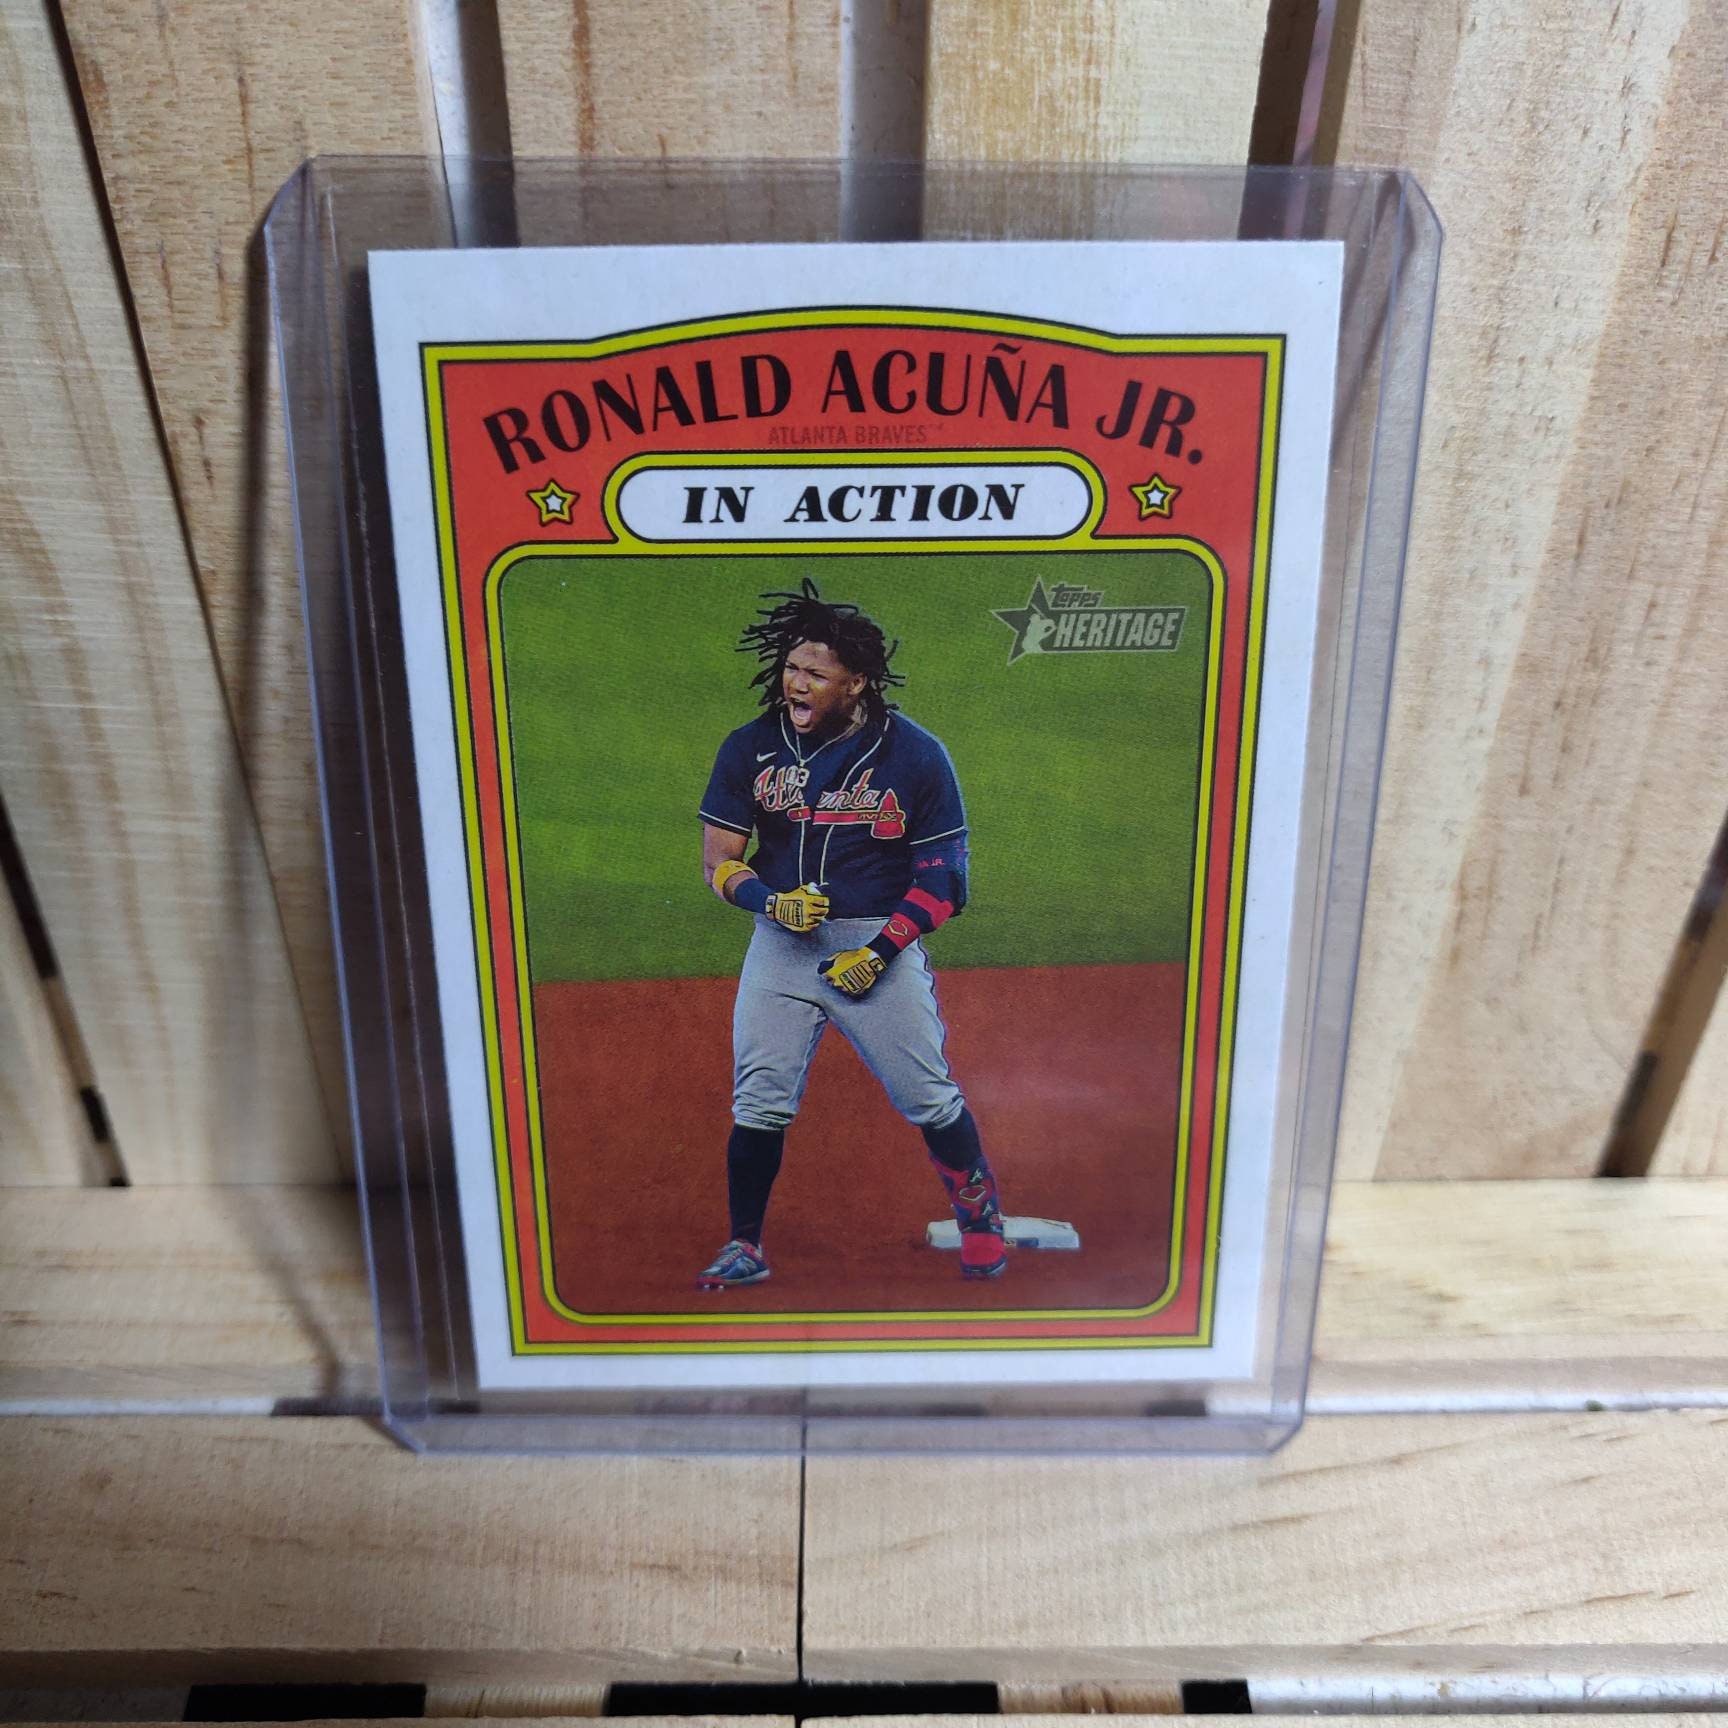 Ronald Acuna Jr in Action 2021 Topps Heritage Base Set 